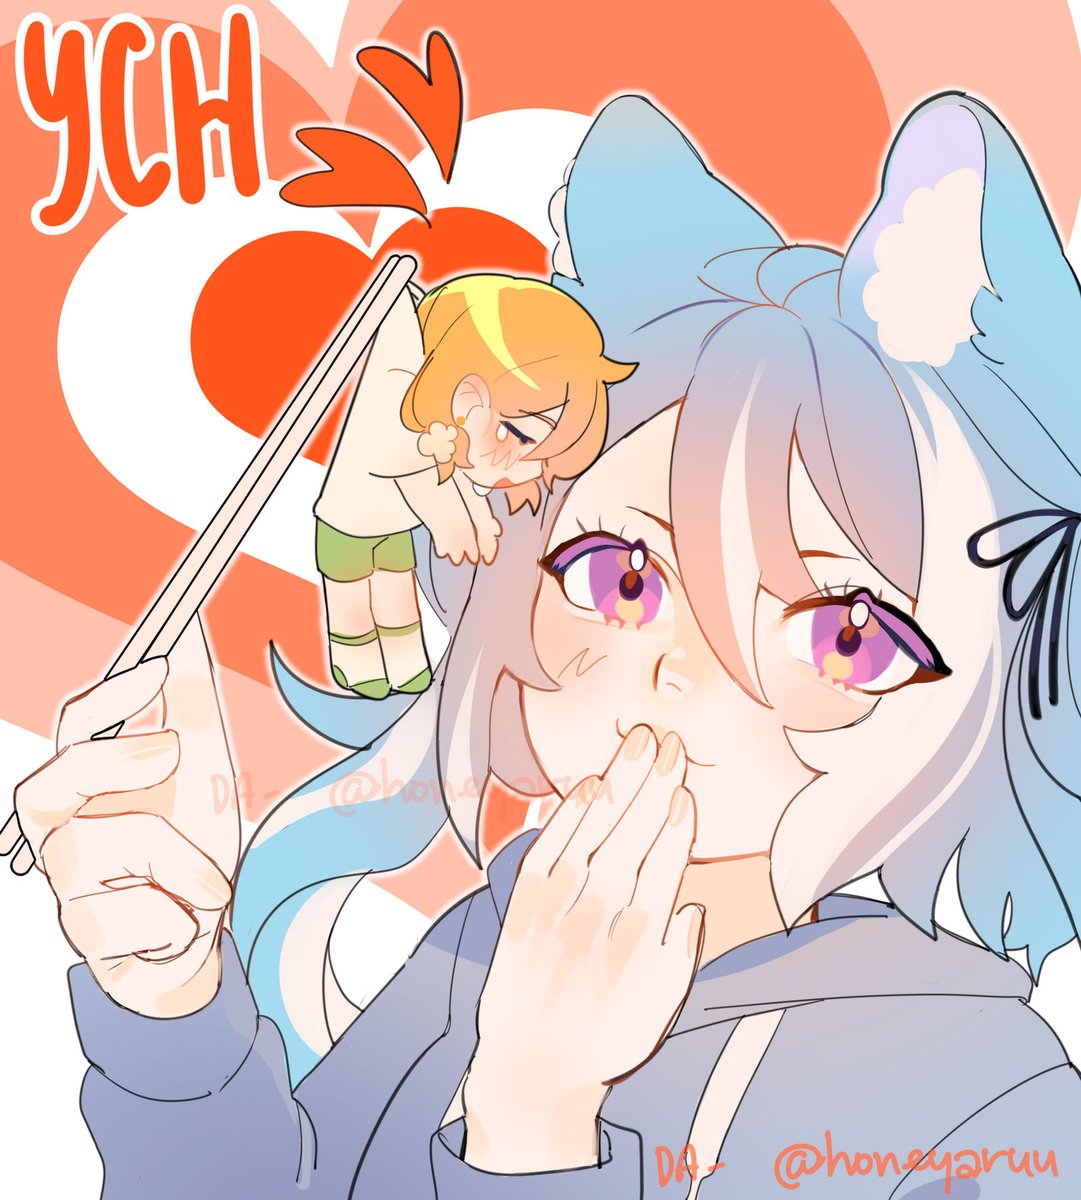 YCH 🍣

SP - $35
- 3 slots open

Payments are made through PayPal, Payoneer or Ko-fi (USD)

To take a slot, DM me here or in Discord (honeyaruu) 
Examples in reply

#YCH